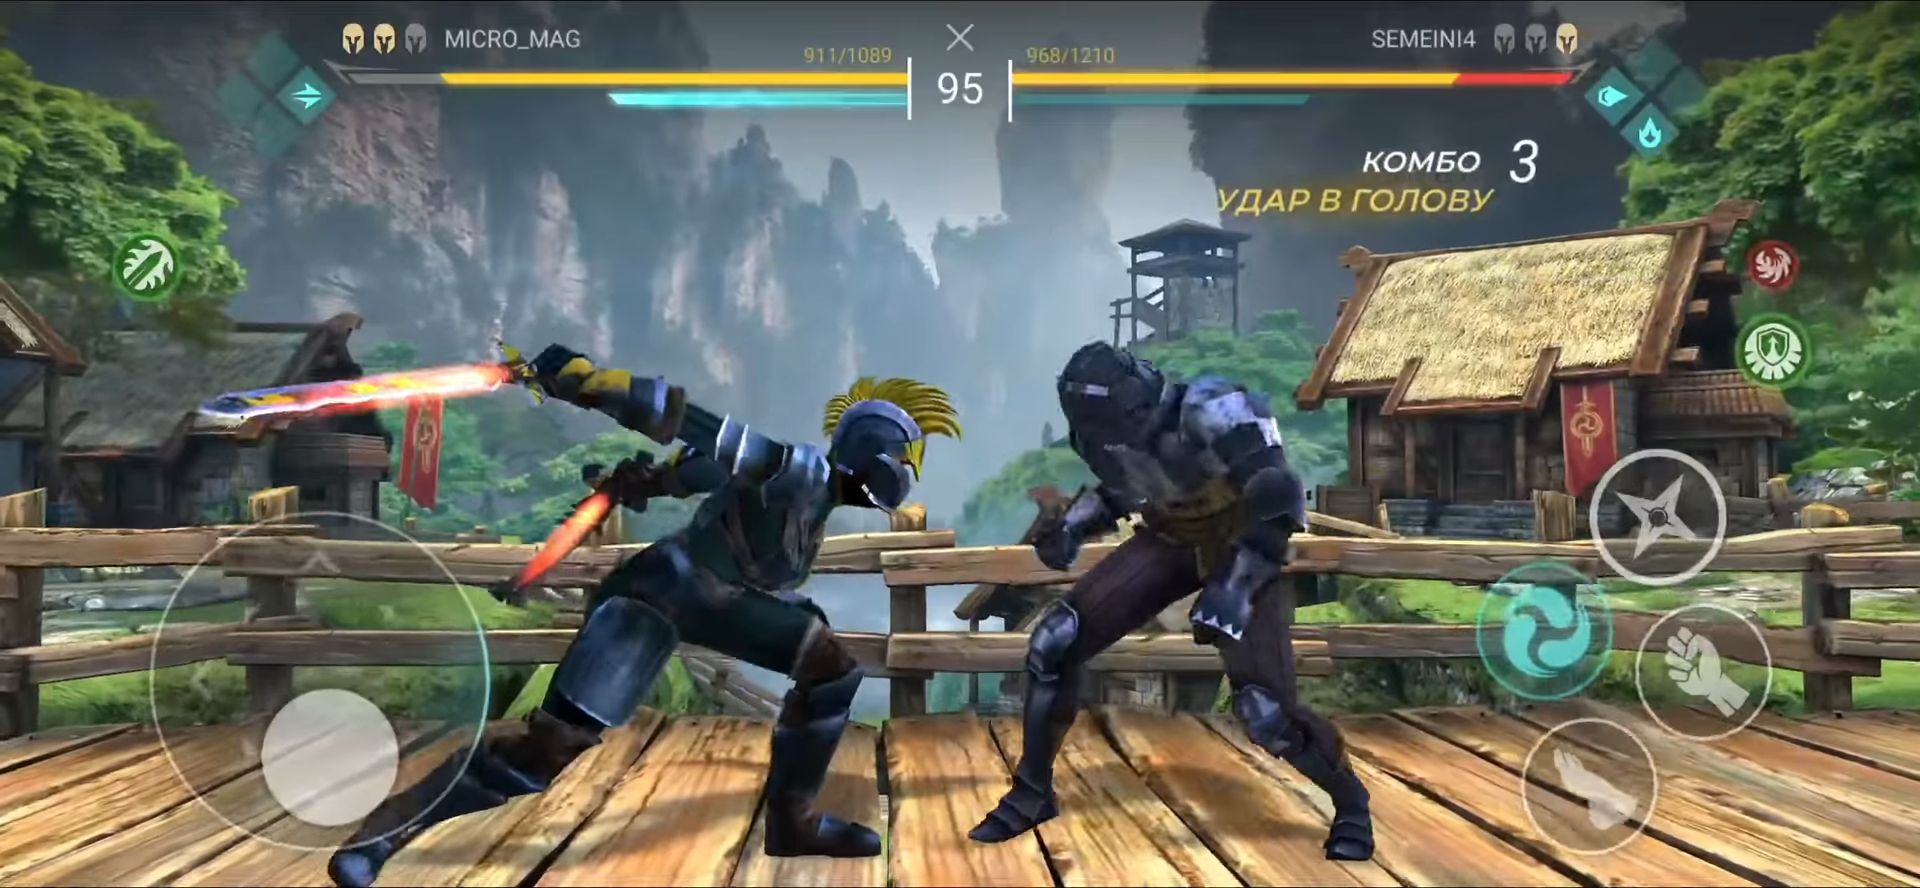 download free download shadow fight 4 arena